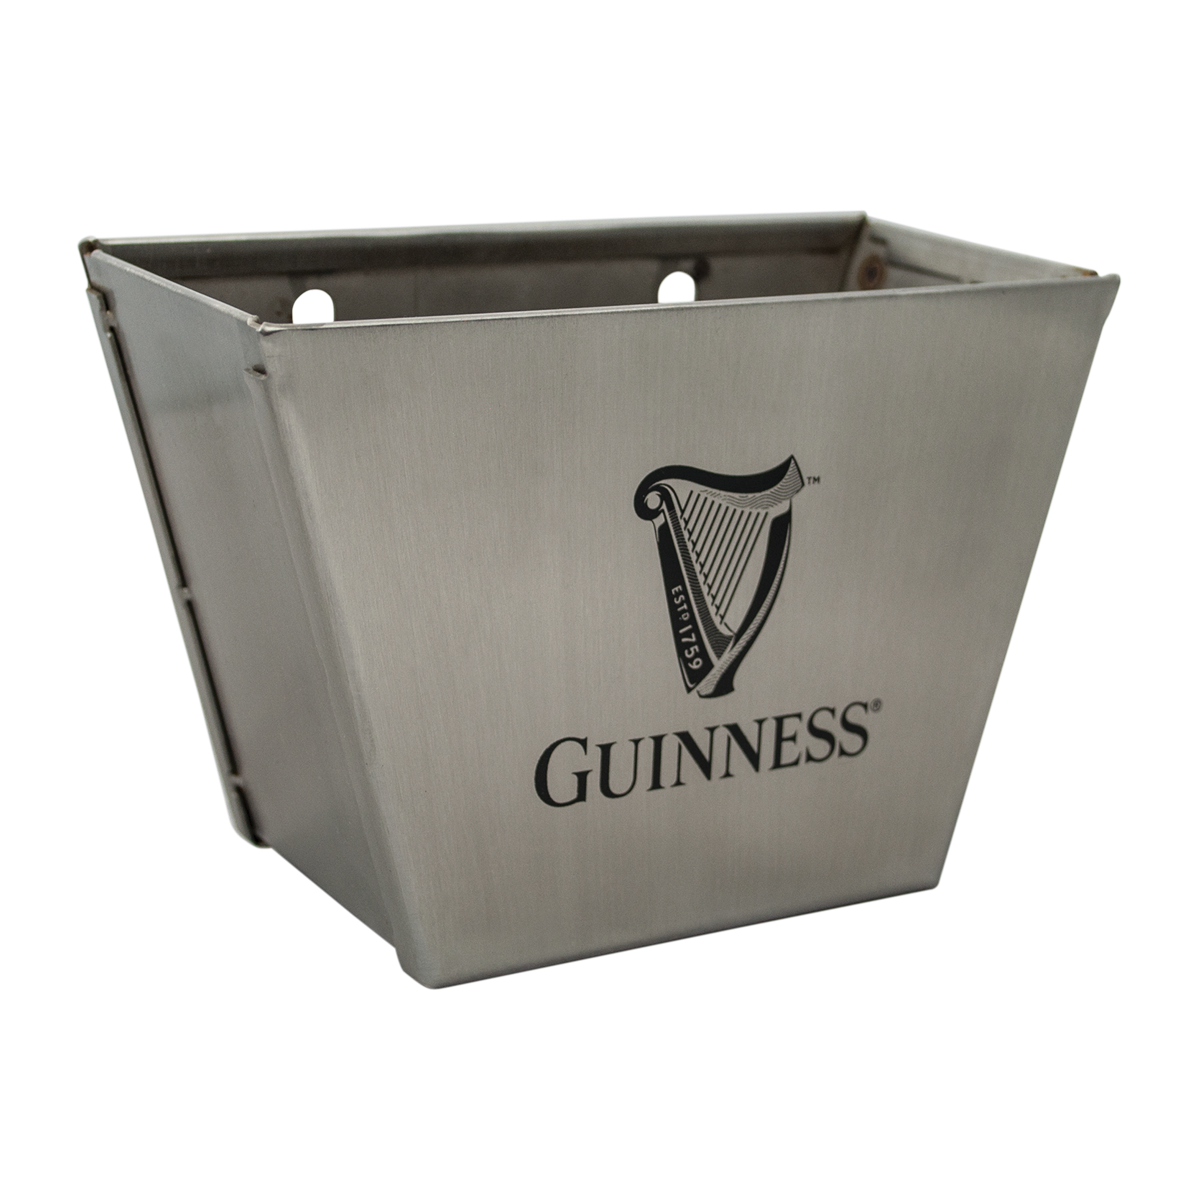 Guinness Cap Catcher - Signature Boxed for your home bar.